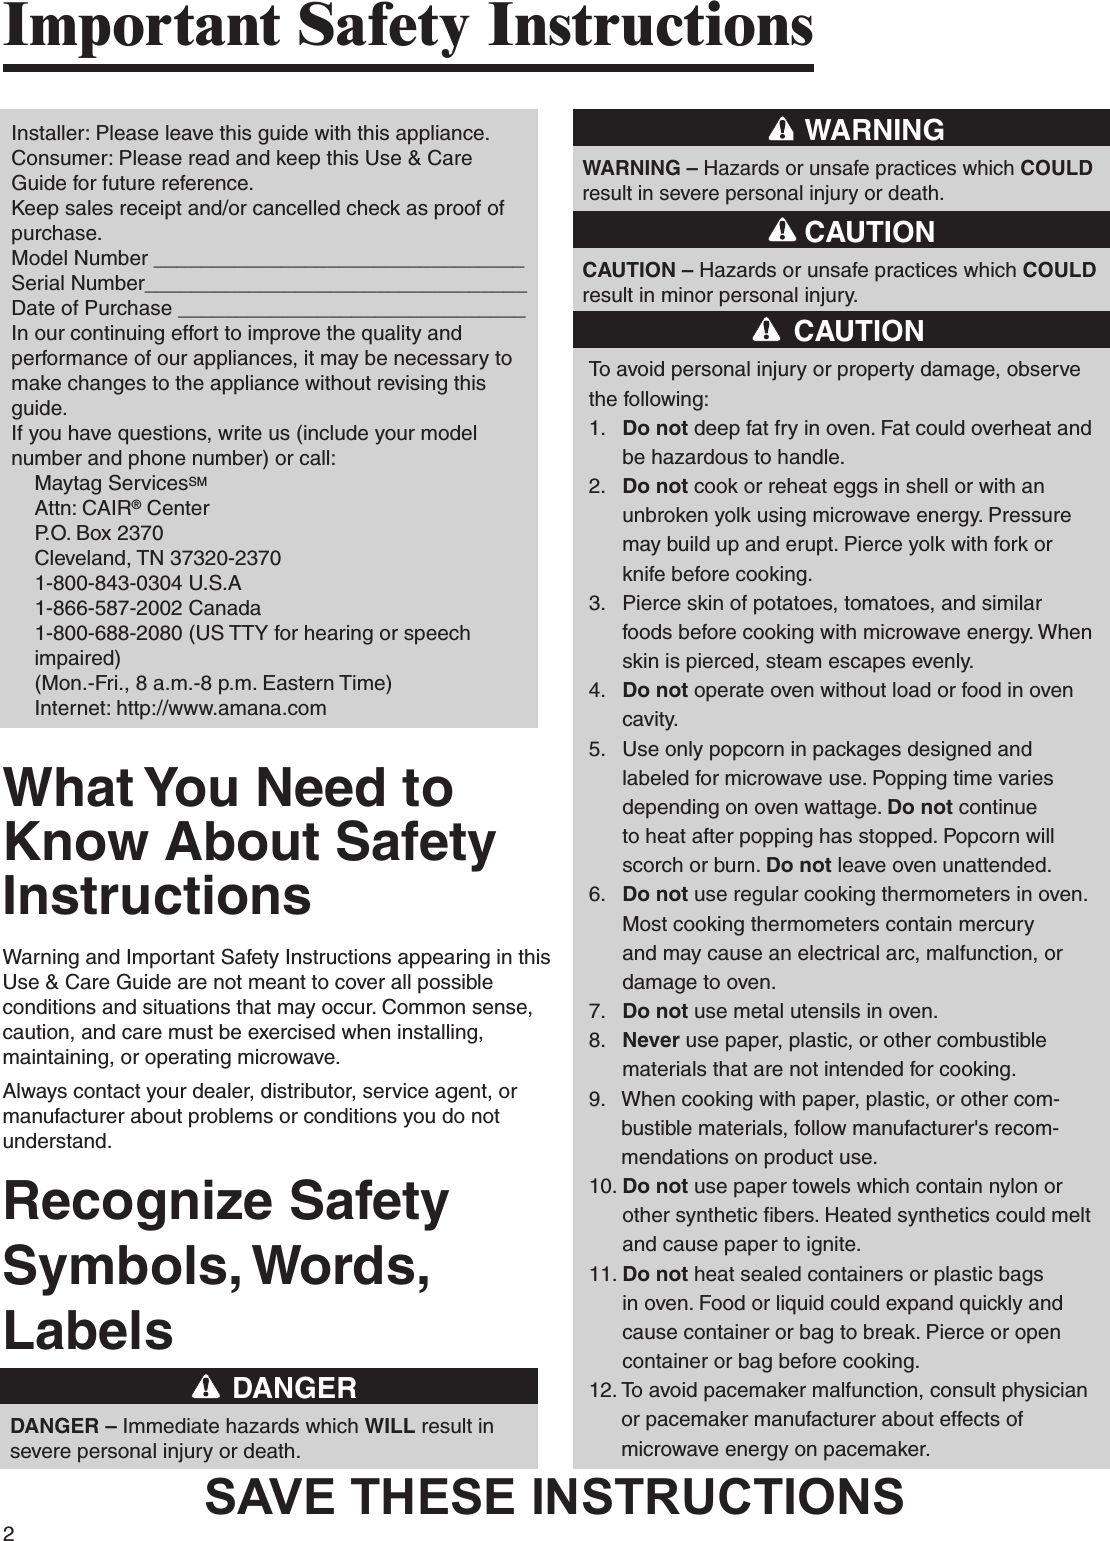 2Important Safety InstructionsInstaller: Please leave this guide with this appliance.Consumer: Please read and keep this Use &amp; Care Guide for future reference.Keep sales receipt and/or cancelled check as proof ofpurchase.Model Number ________________________________Serial Number_________________________________Date of Purchase ______________________________In our continuing effort to improve the quality andperformance of our appliances, it may be necessary tomake changes to the appliance without revising thisguide.If you have questions, write us (include your modelnumber and phone number) or call:    Maytag ServicesSM    Attn: CAIR® Center    P.O. Box 2370    Cleveland, TN 37320-2370    1-800-843-0304 U.S.A    1-866-587-2002 Canada     1-800-688-2080 (US TTY for hearing or speech impaired)    (Mon.-Fri., 8 a.m.-8 p.m. Eastern Time)    Internet: http://www.amana.comWhat You Need to Know About Safety InstructionsWarning and Important Safety Instructions appearing in thisUse &amp; Care Guide are not meant to cover all possibleconditions and situations that may occur. Common sense,caution, and care must be exercised when installing,maintaining, or operating microwave.Always contact your dealer, distributor, service agent, ormanufacturer about problems or conditions you do notunderstand.Recognize Safety Symbols, Words, LabelsDANGERDANGER – Immediate hazards which WILL result insevere personal injury or death.WARNINGWARNING – Hazards or unsafe practices which COULD result in severe personal injury or death.CAUTIONCAUTION – Hazards or unsafe practices which COULDresult in minor personal injury.To avoid personal injury or property damage, observe the following:1.    Do not deep fat fry in oven. Fat could overheat and be hazardous to handle.2.    Do not cook or reheat eggs in shell or with an unbroken yolk using microwave energy. Pressure may build up and erupt. Pierce yolk with fork or knife before cooking.3.    Pierce skin of potatoes, tomatoes, and similar foods before cooking with microwave energy. When skin is pierced, steam escapes evenly.4.    Do not operate oven without load or food in oven cavity.5.    Use only popcorn in packages designed and labeled for microwave use. Popping time varies depending on oven wattage. Do not continue to heat after popping has stopped. Popcorn will scorch or burn. Do not leave oven unattended.6.    Do not use regular cooking thermometers in oven. Most cooking thermometers contain mercury and may cause an electrical arc, malfunction, or damage to oven.7.    Do not use metal utensils in oven.8.    Never use paper, plastic, or other combustible materials that are not intended for cooking.9.    When cooking with paper, plastic, or other com-bustible materials, follow manufacturer&apos;s recom-mendations on product use.10.  Do not use paper towels which contain nylon or other synthetic fibers. Heated synthetics could melt and cause paper to ignite.11.  Do not heat sealed containers or plastic bags in oven. Food or liquid could expand quickly and cause container or bag to break. Pierce or open container or bag before cooking.12.  To avoid pacemaker malfunction, consult physician or pacemaker manufacturer about effects of microwave energy on pacemaker.CAUTIONSAVE THESE INSTRUCTIONS